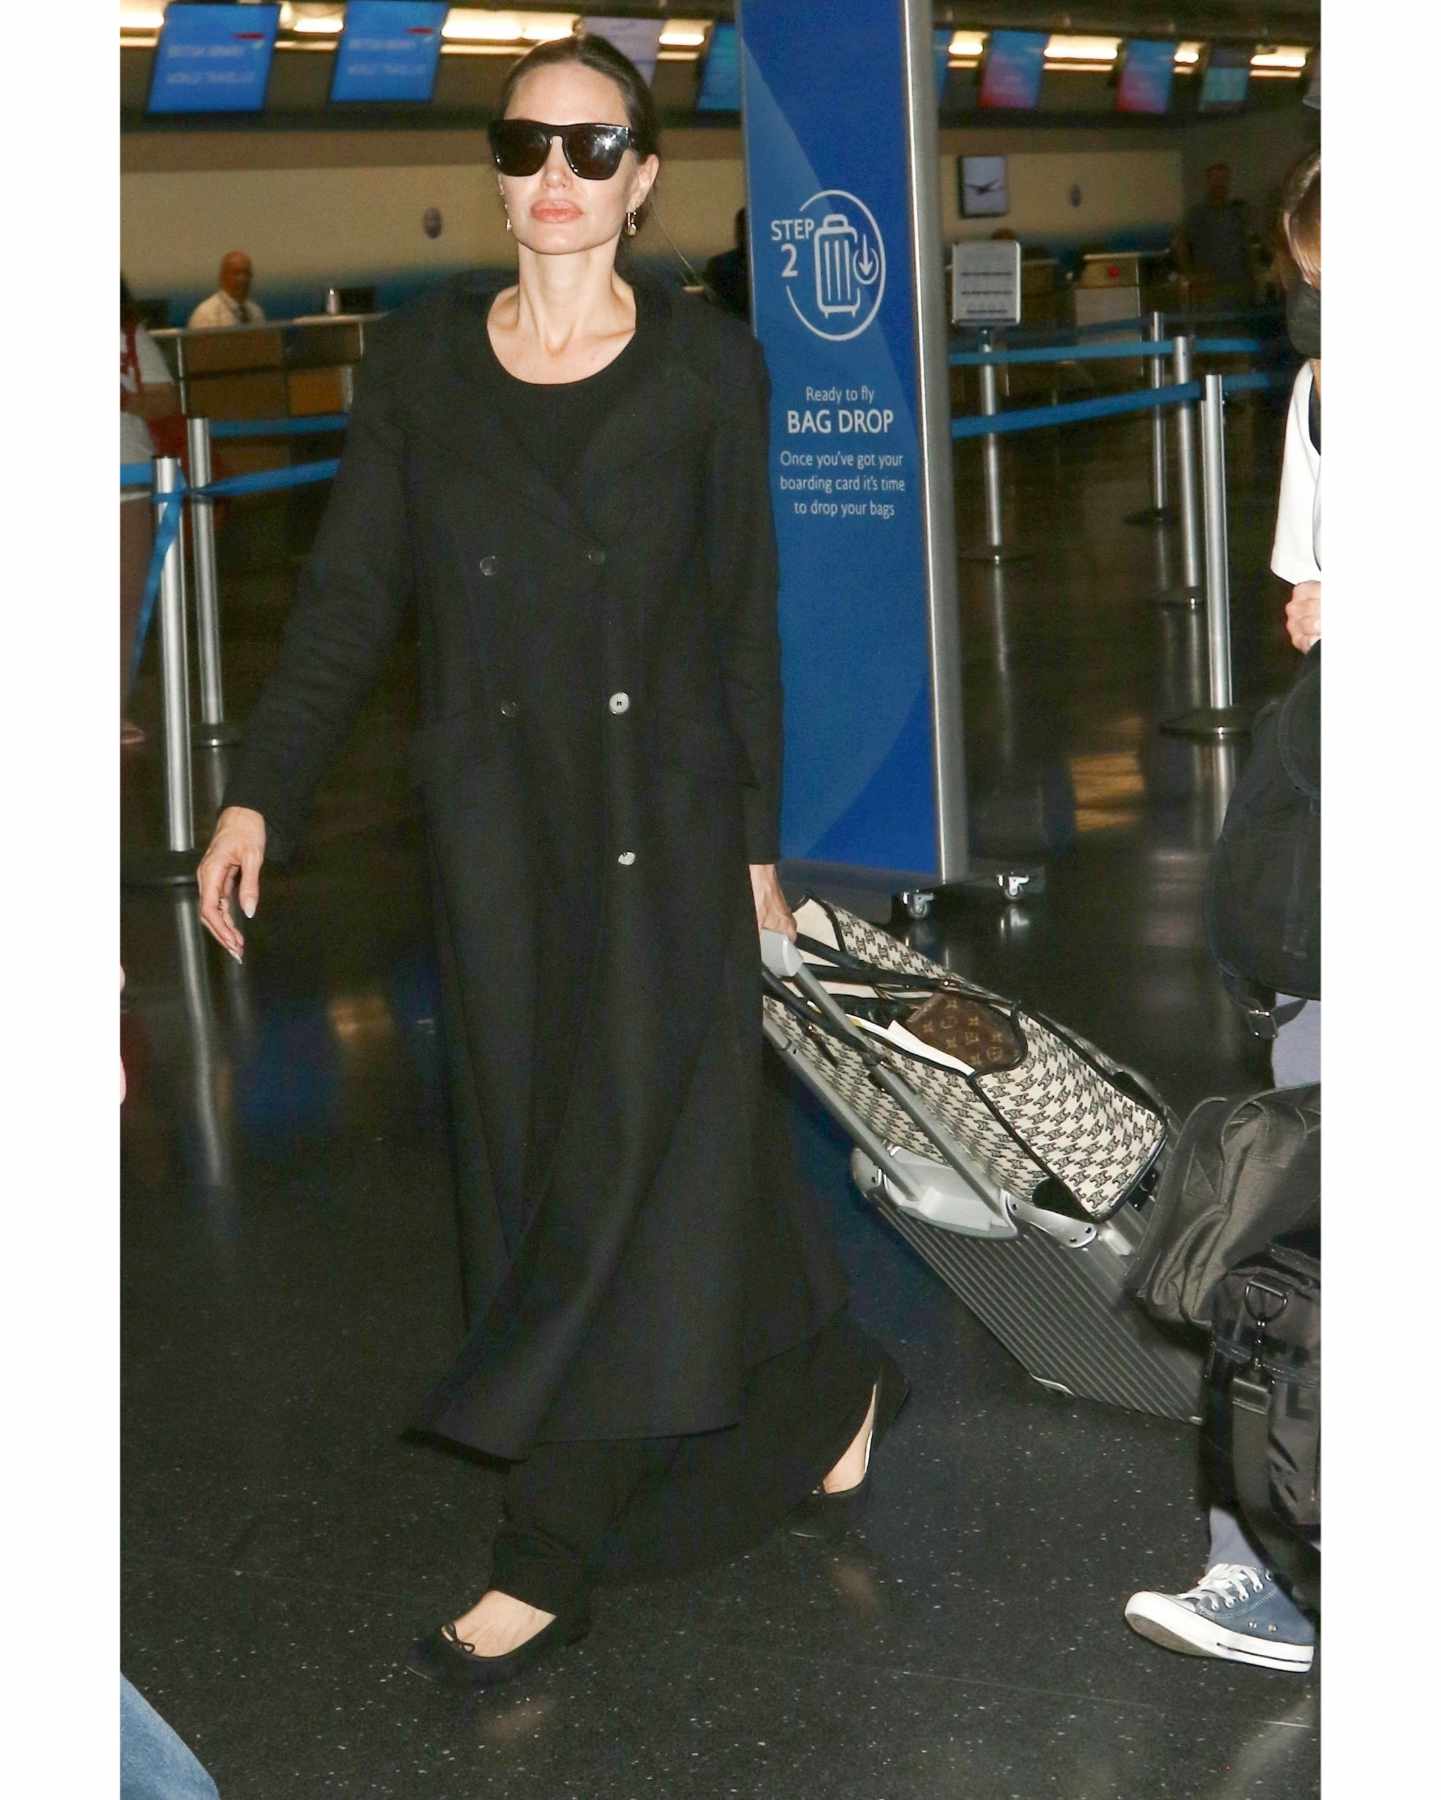 Even Angelina Jolie's Airport Outfits Are Stealthily Wealthy